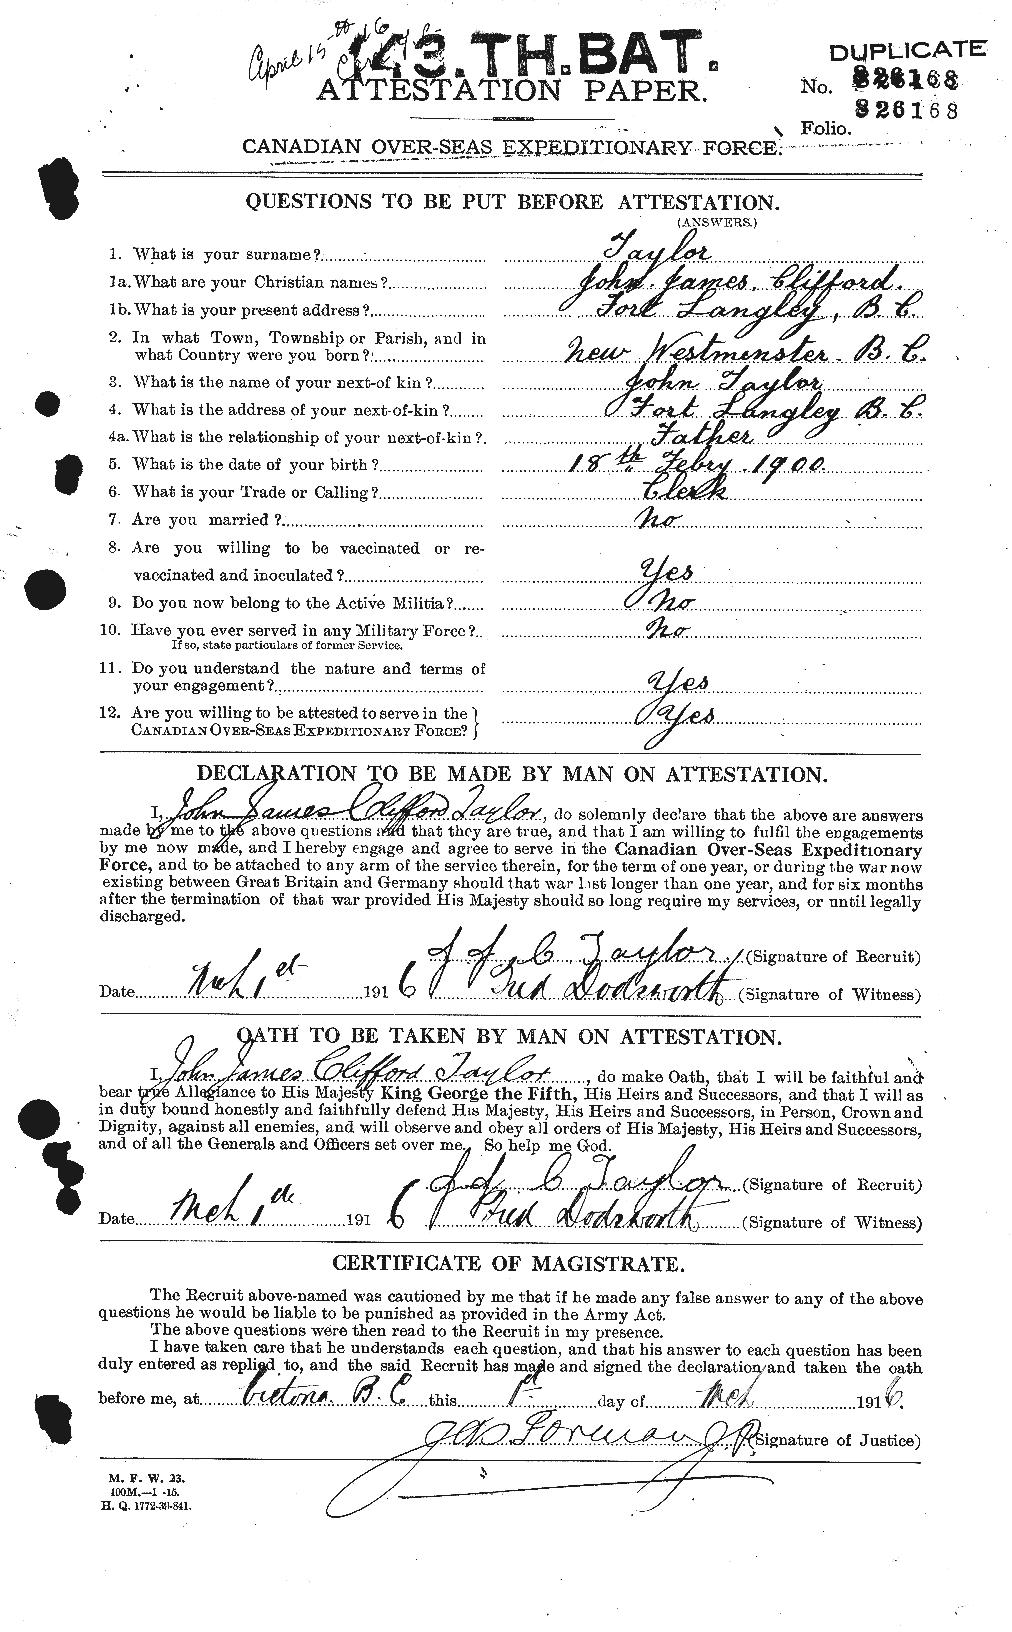 Personnel Records of the First World War - CEF 627117a